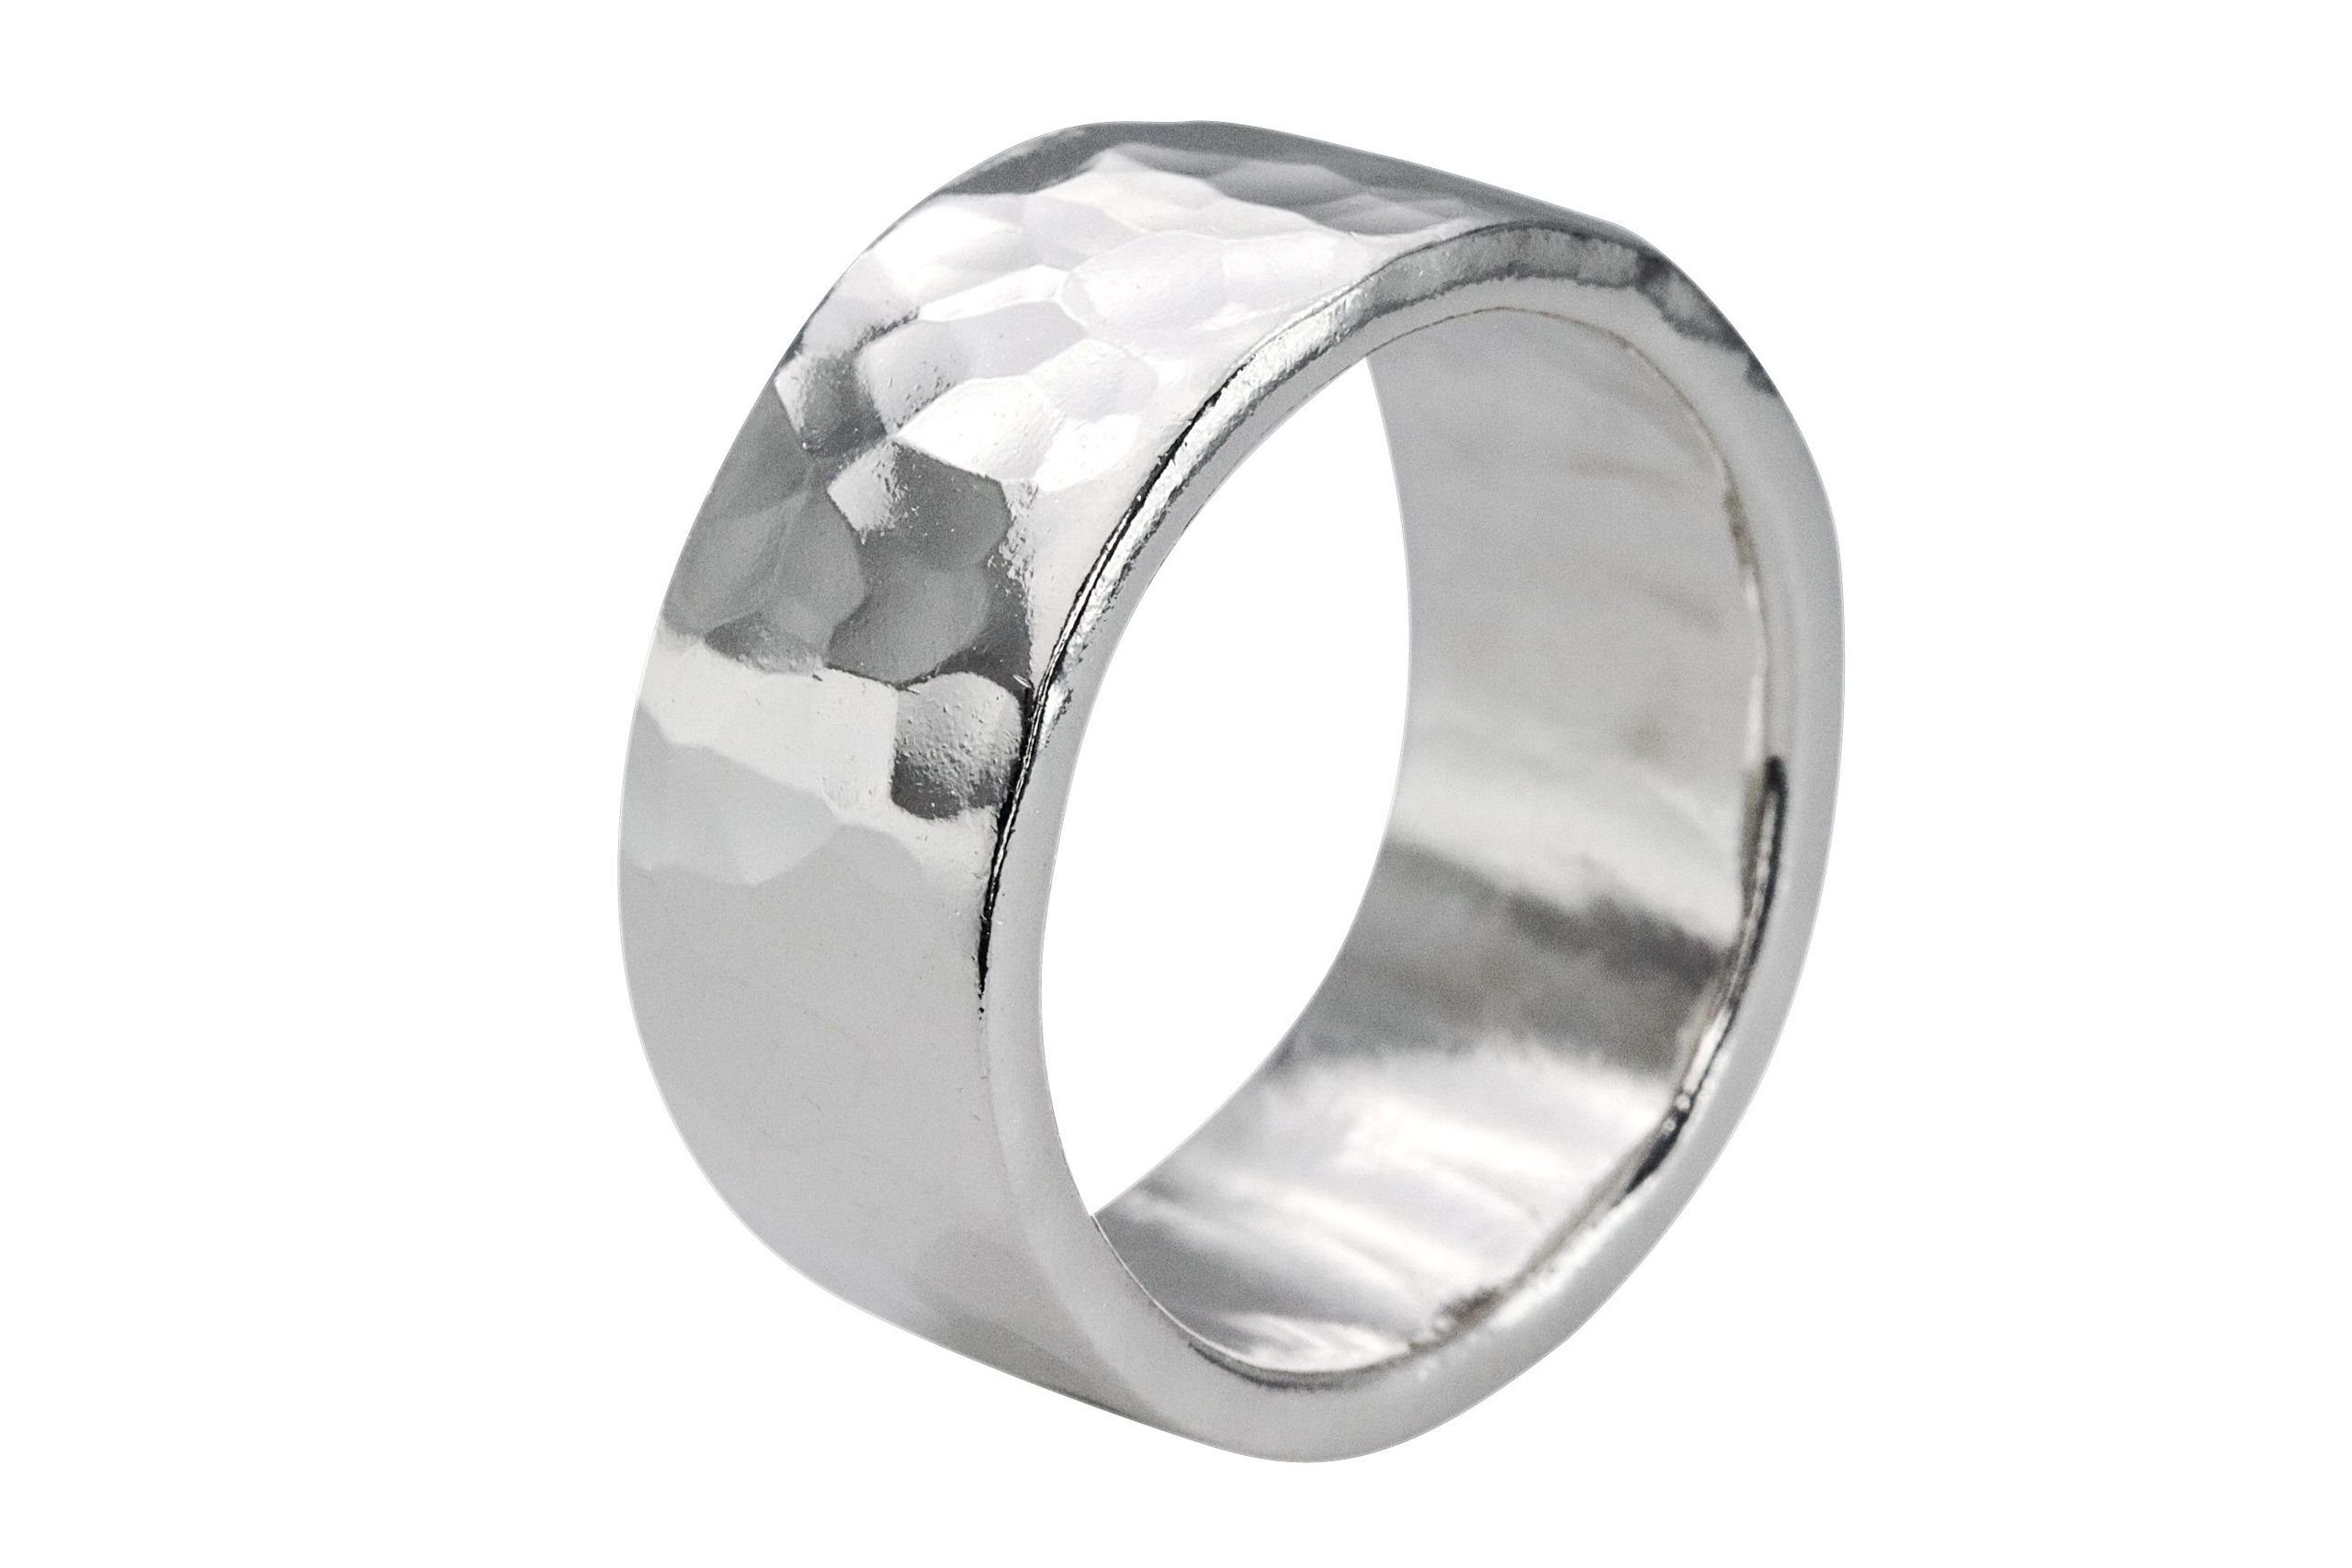 SILBERMOOS Silberring Extra massiver Schmiedering, 925 Sterling Silber